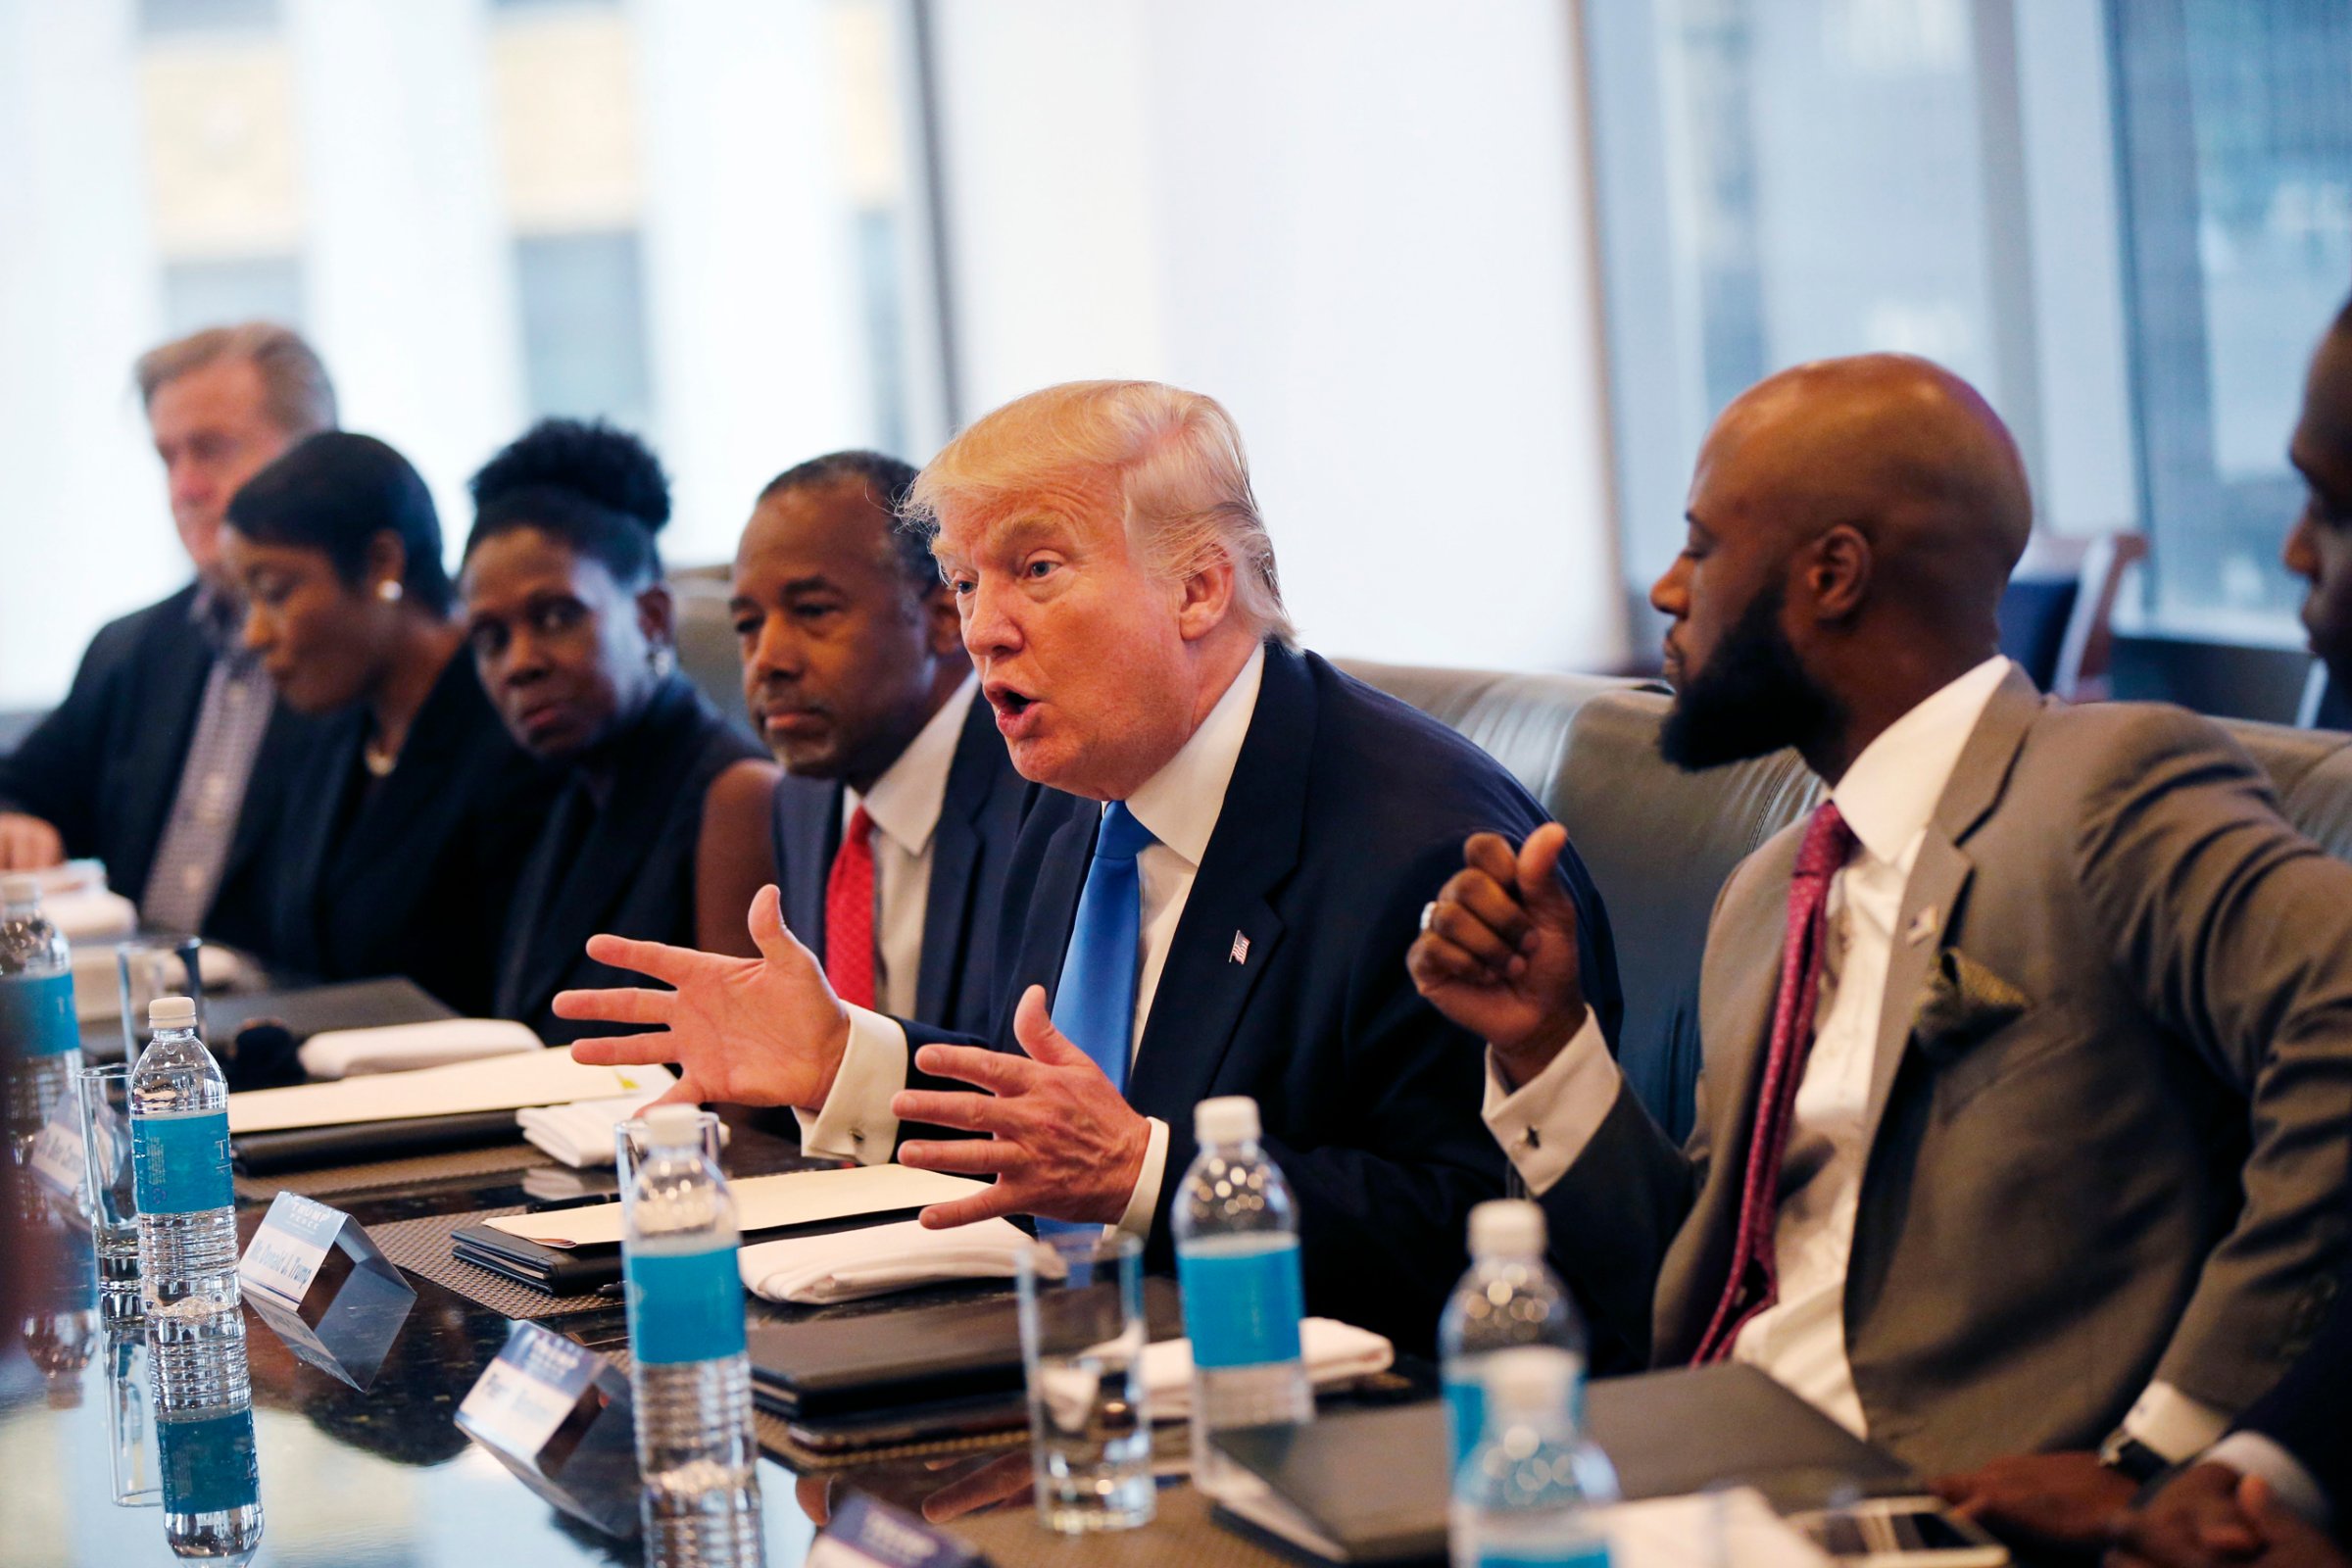 Republican presidential candidate Donald Trump holds a roundtable meeting with the Republican Leadership Initiative in his offices at Trump Tower in New York City on Aug. 25, 2016. Dr. Ben Carson is seated next to Trump at center.